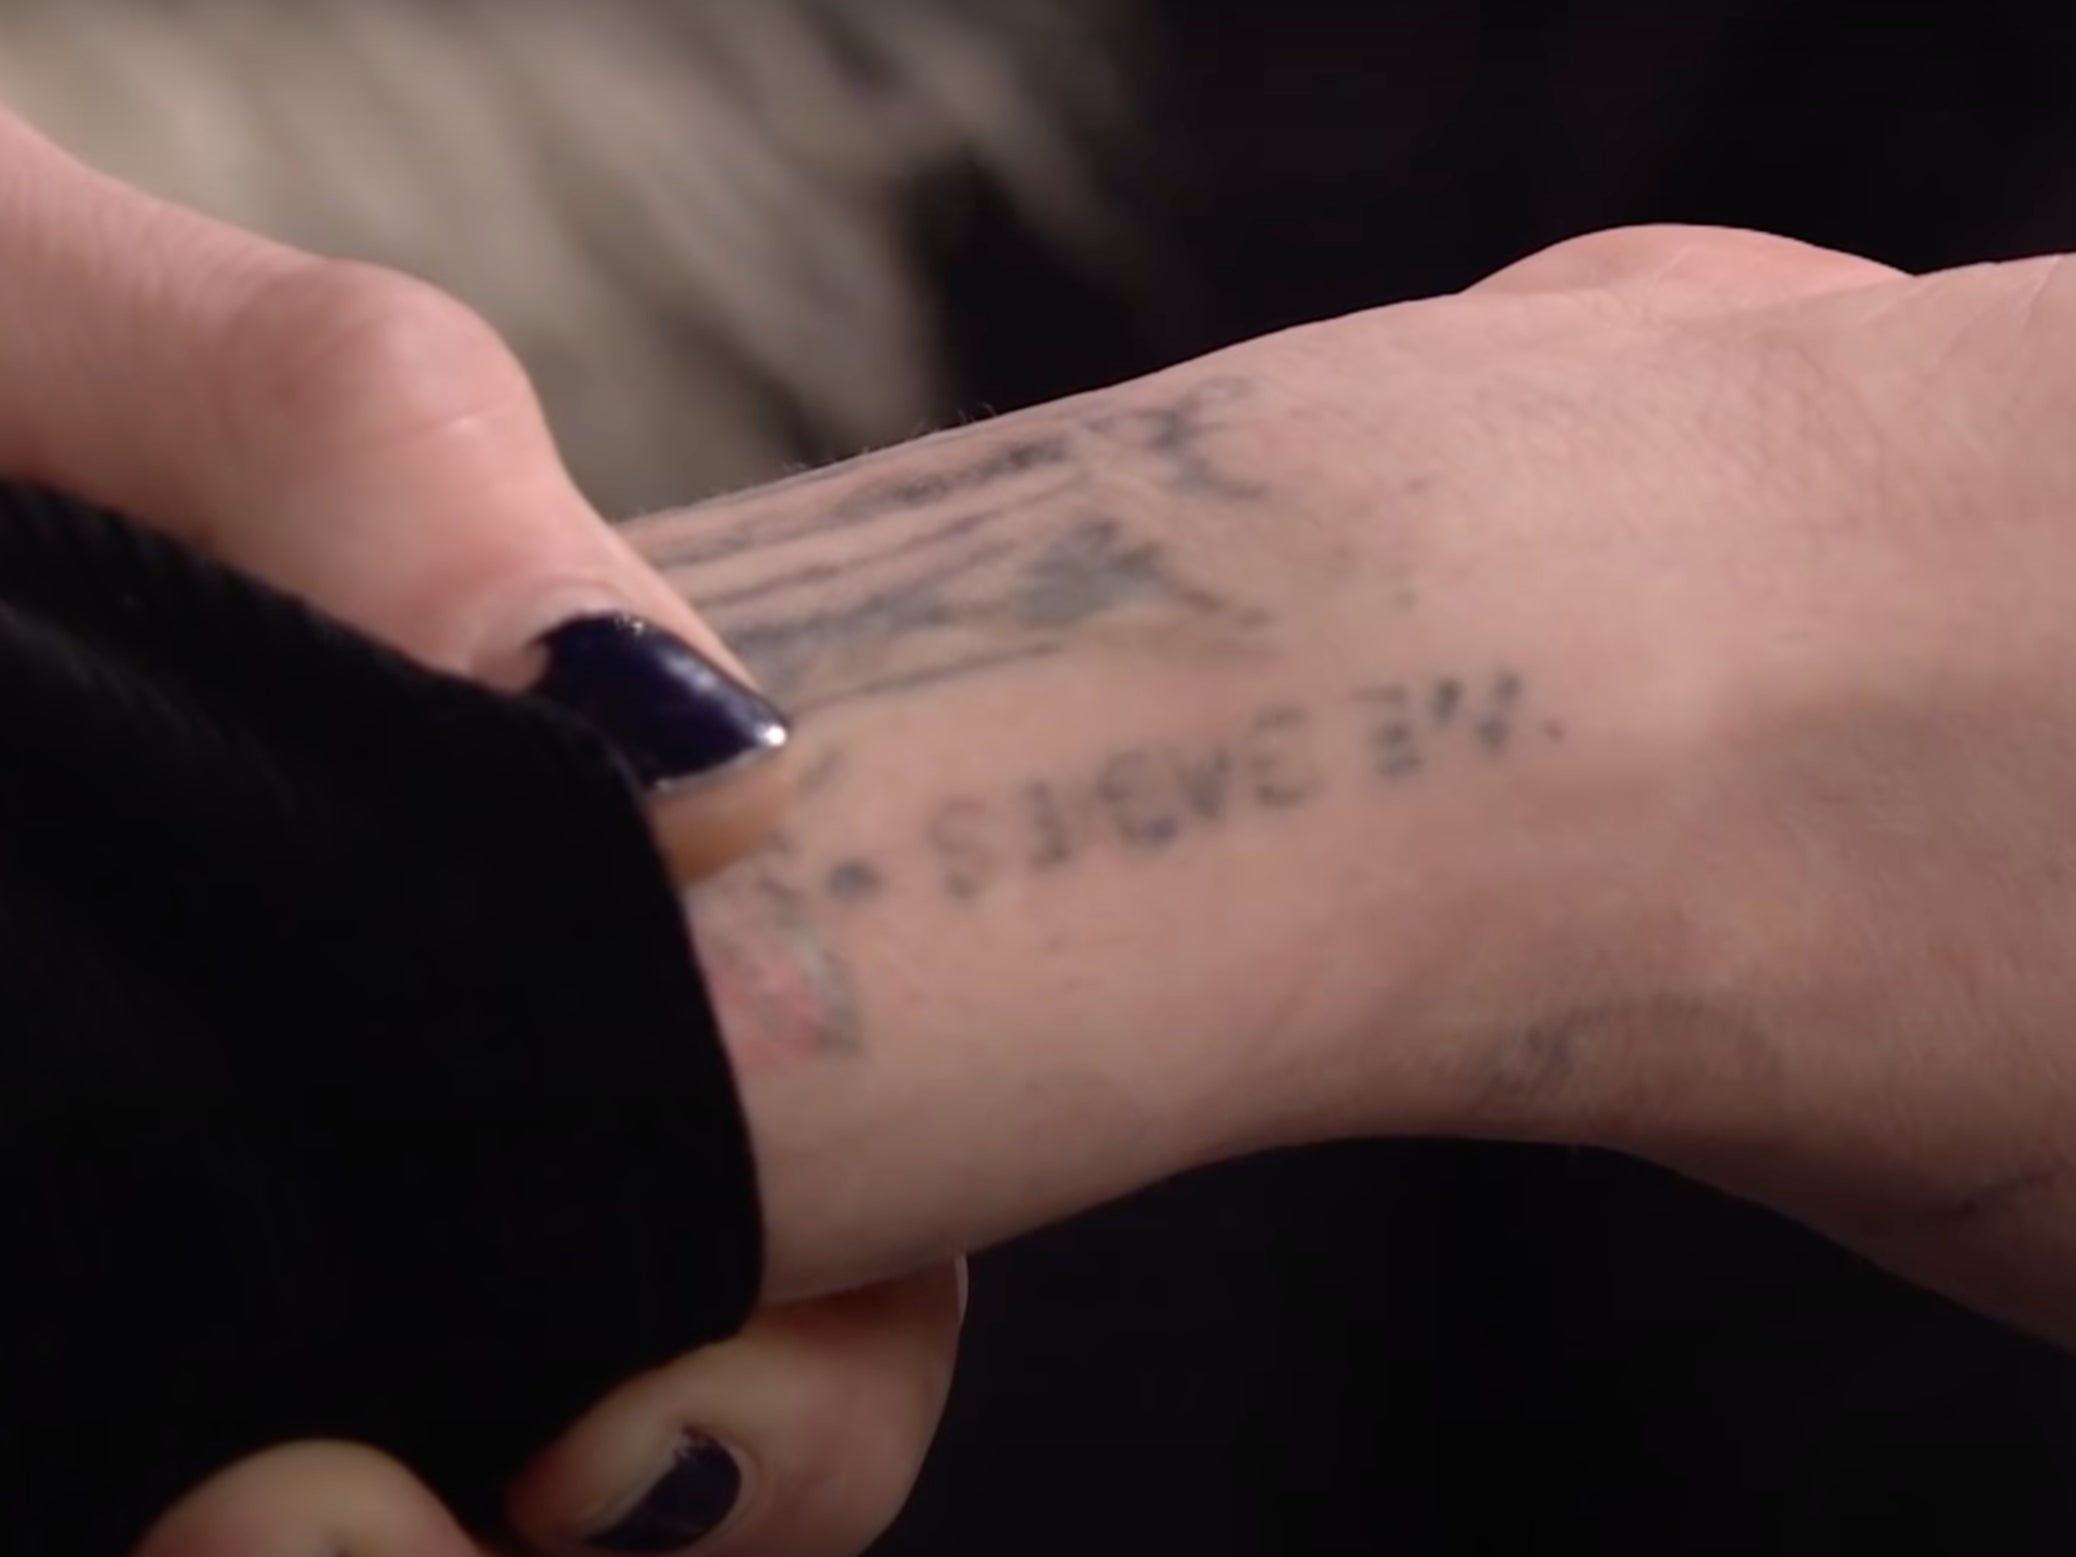 Davidson showed what was left of his tattoo after lasering it off